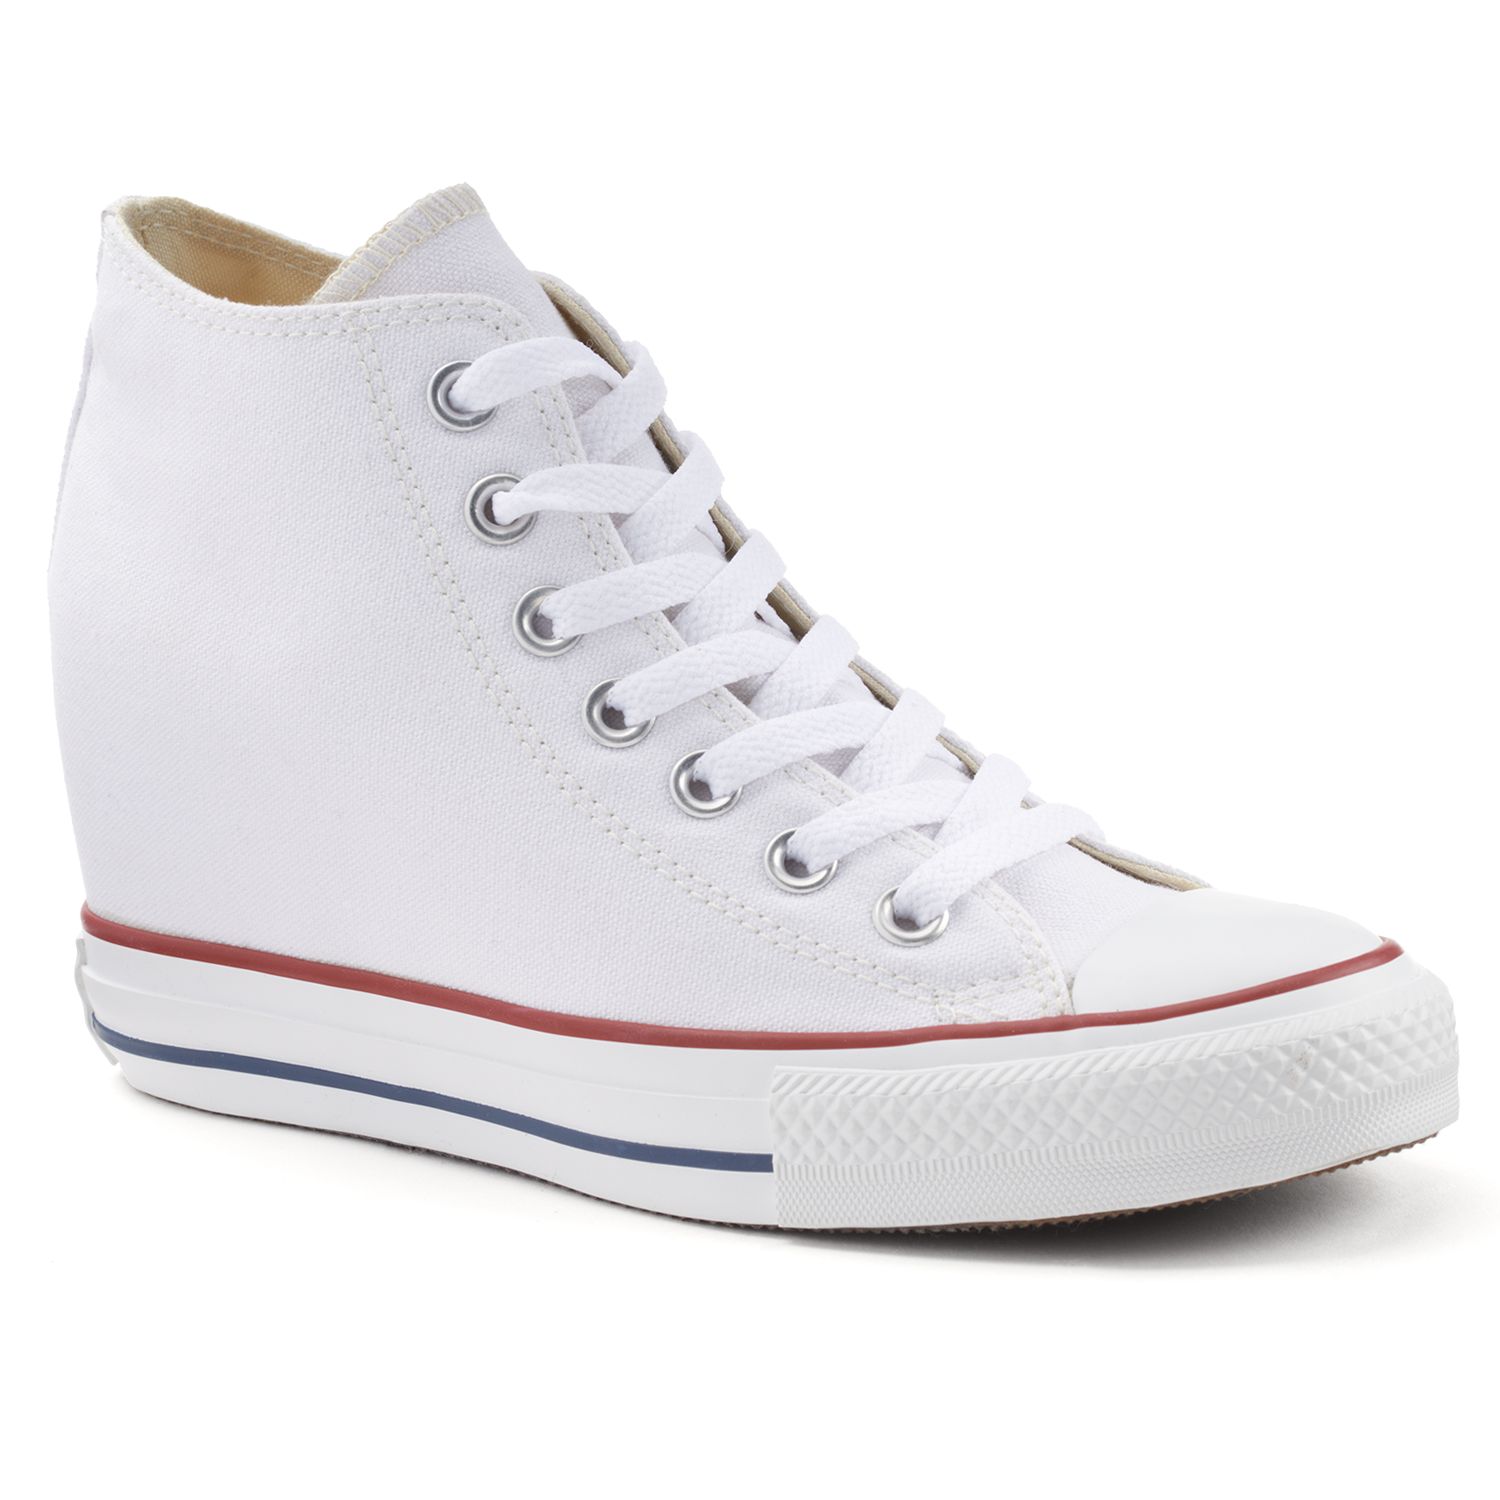 Adult Converse Chuck Taylor All Star Lux Hidden Wedge Mid-Top Sneakers